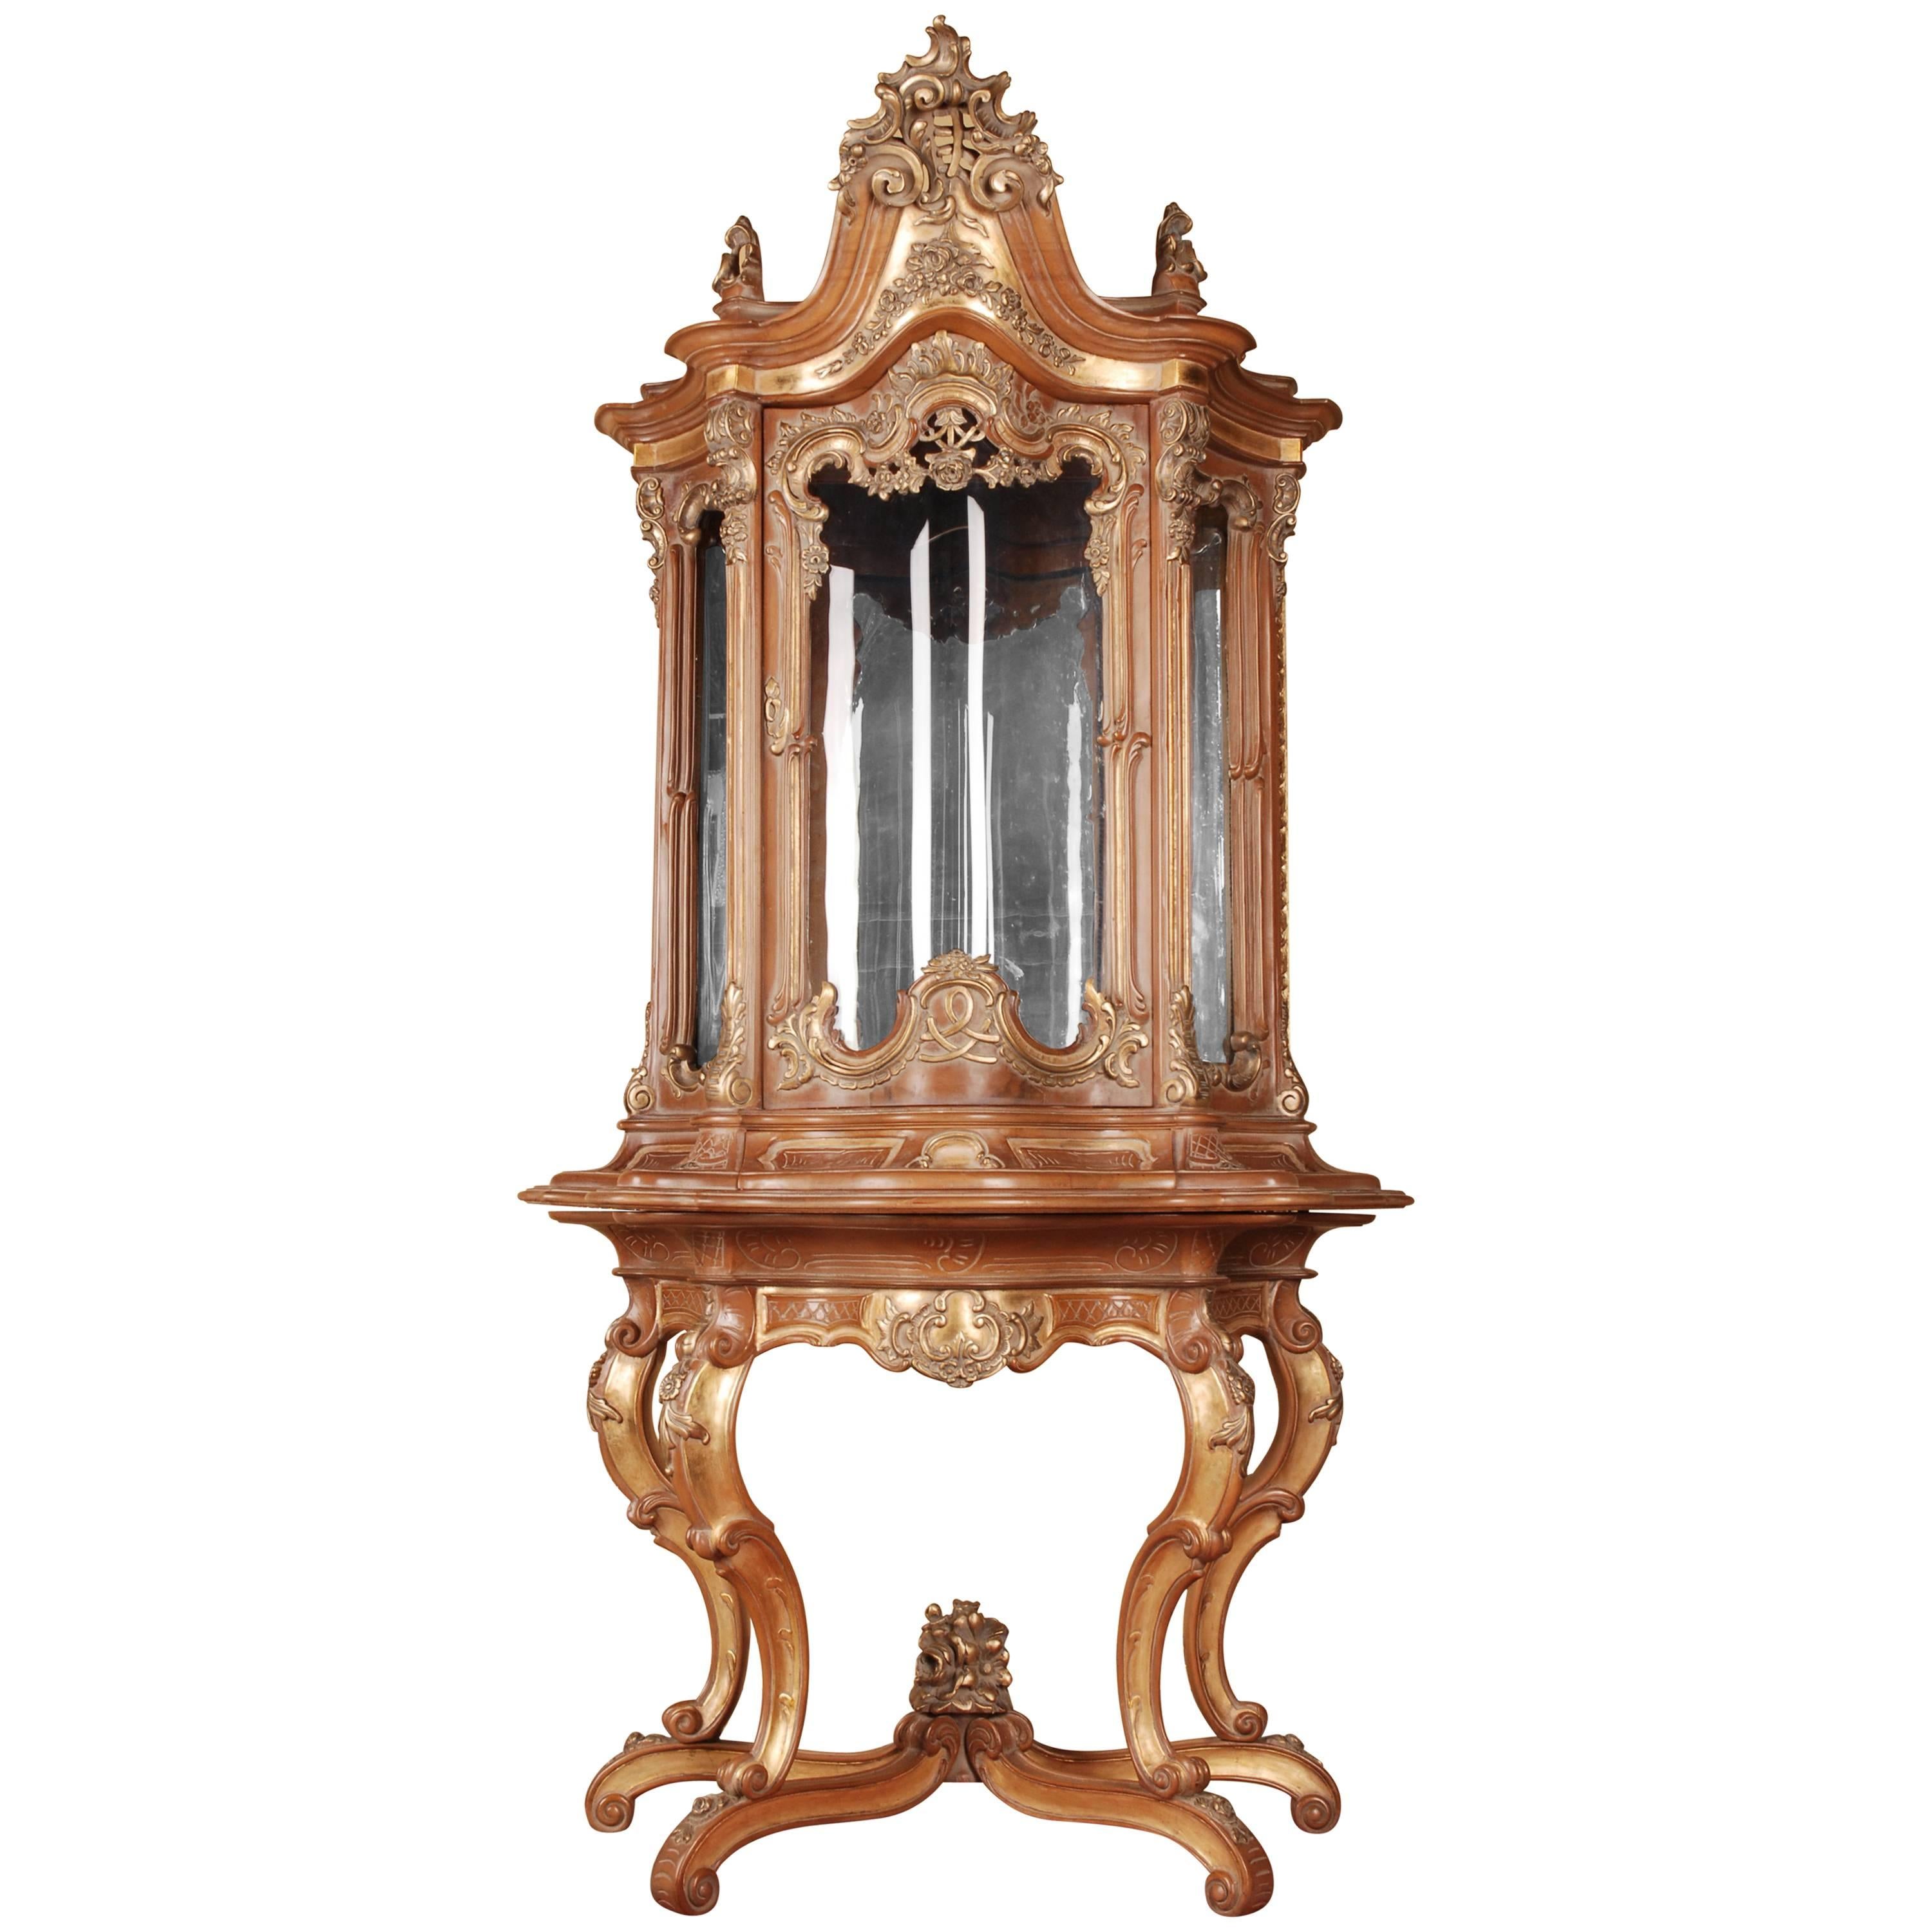 20th Century Splendid Display Cabinet in the Rococo Style